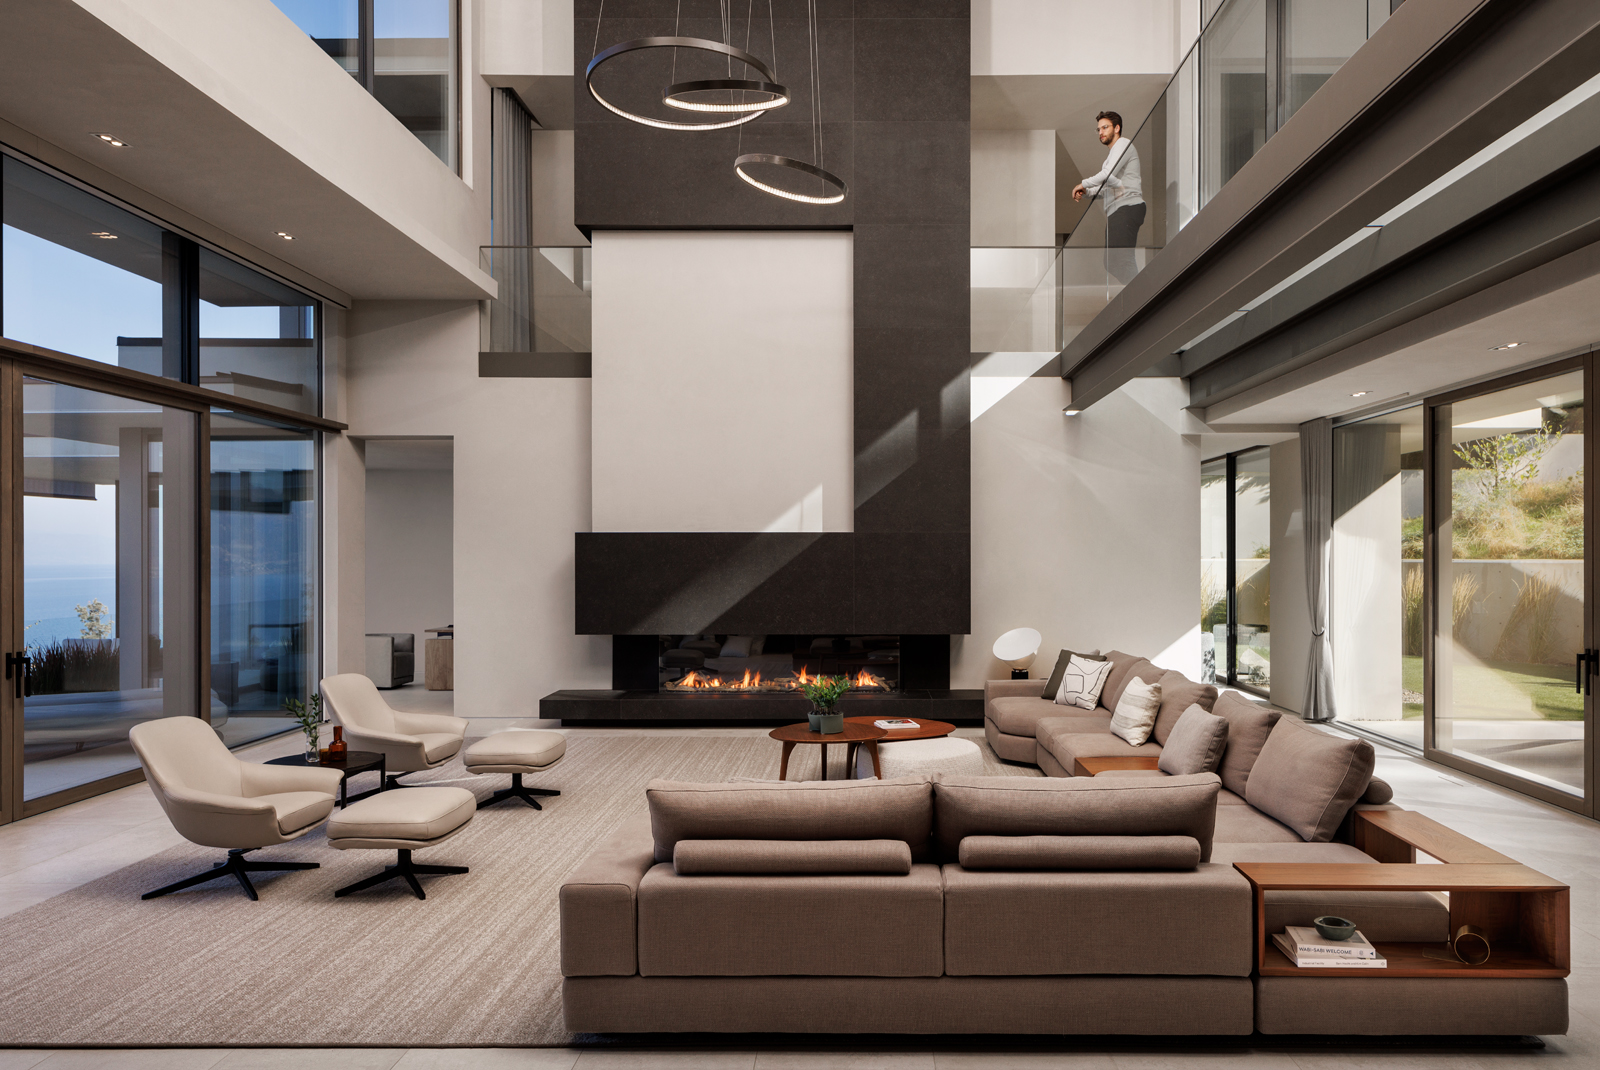 Interior architectural photograph by Shawn Talbot of luxury residential great room with sofas and fireplace